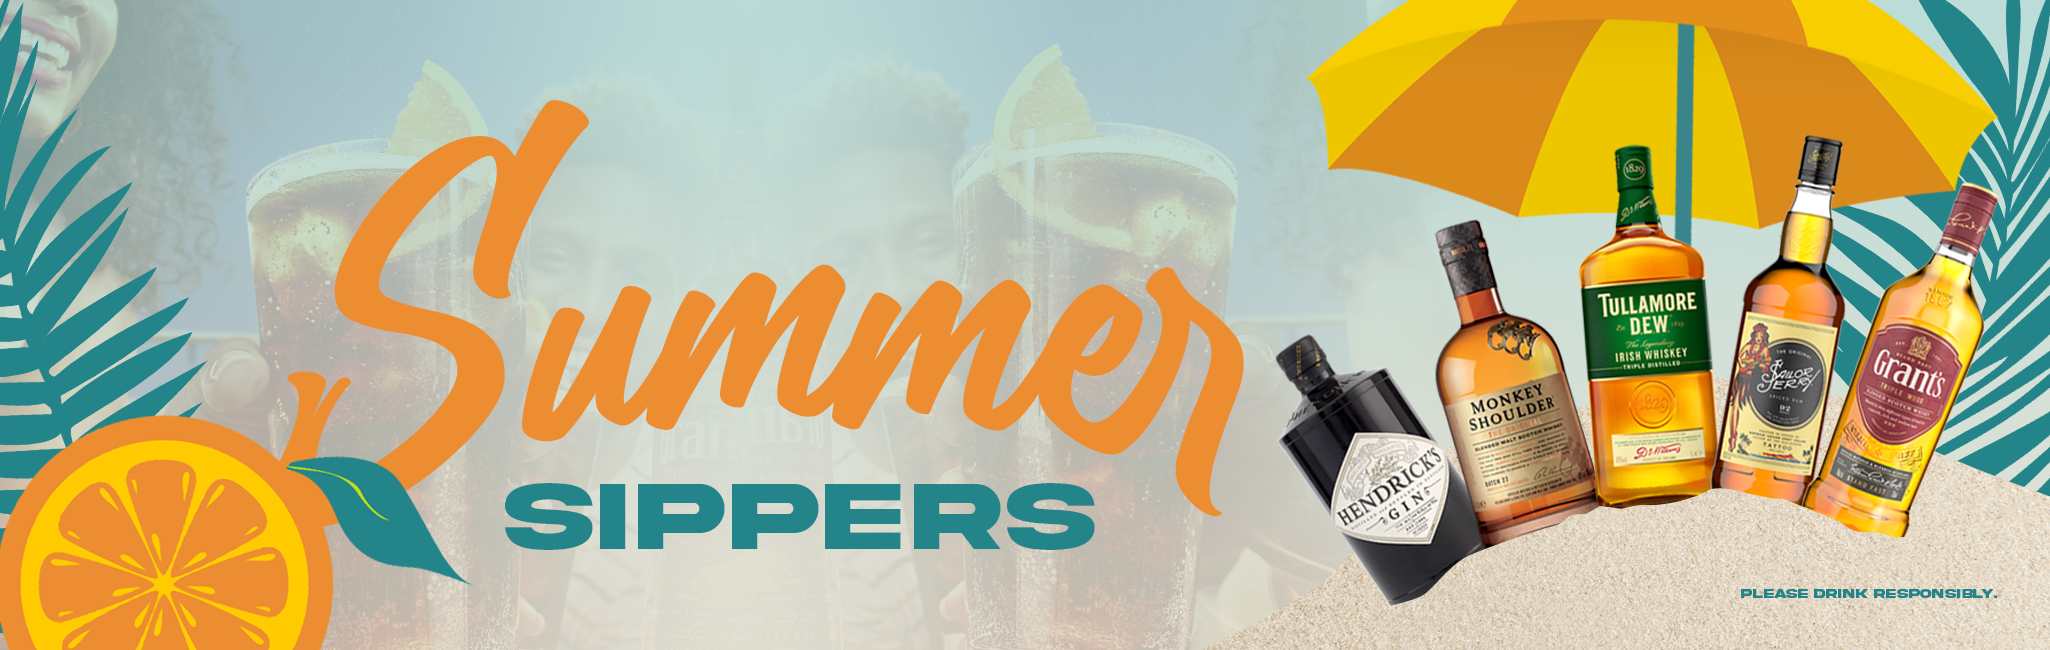 Summer Sippers